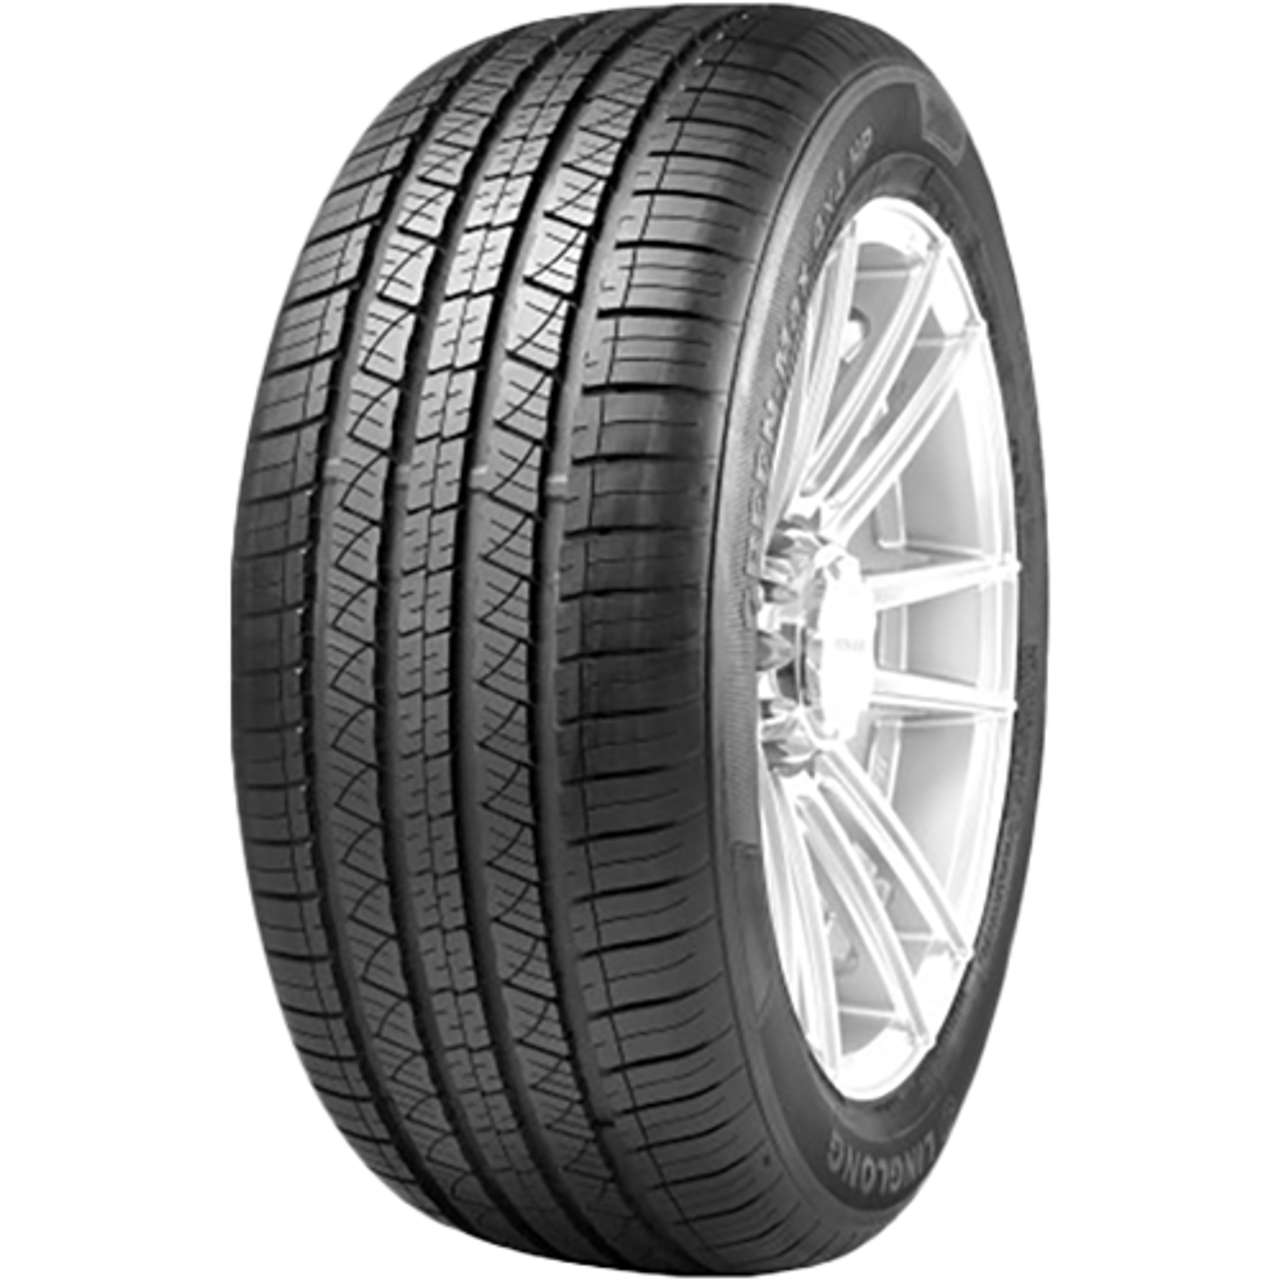 LINGLONG GREEN-MAX 4X4 HP 215/65R16 102H BSW von LINGLONG